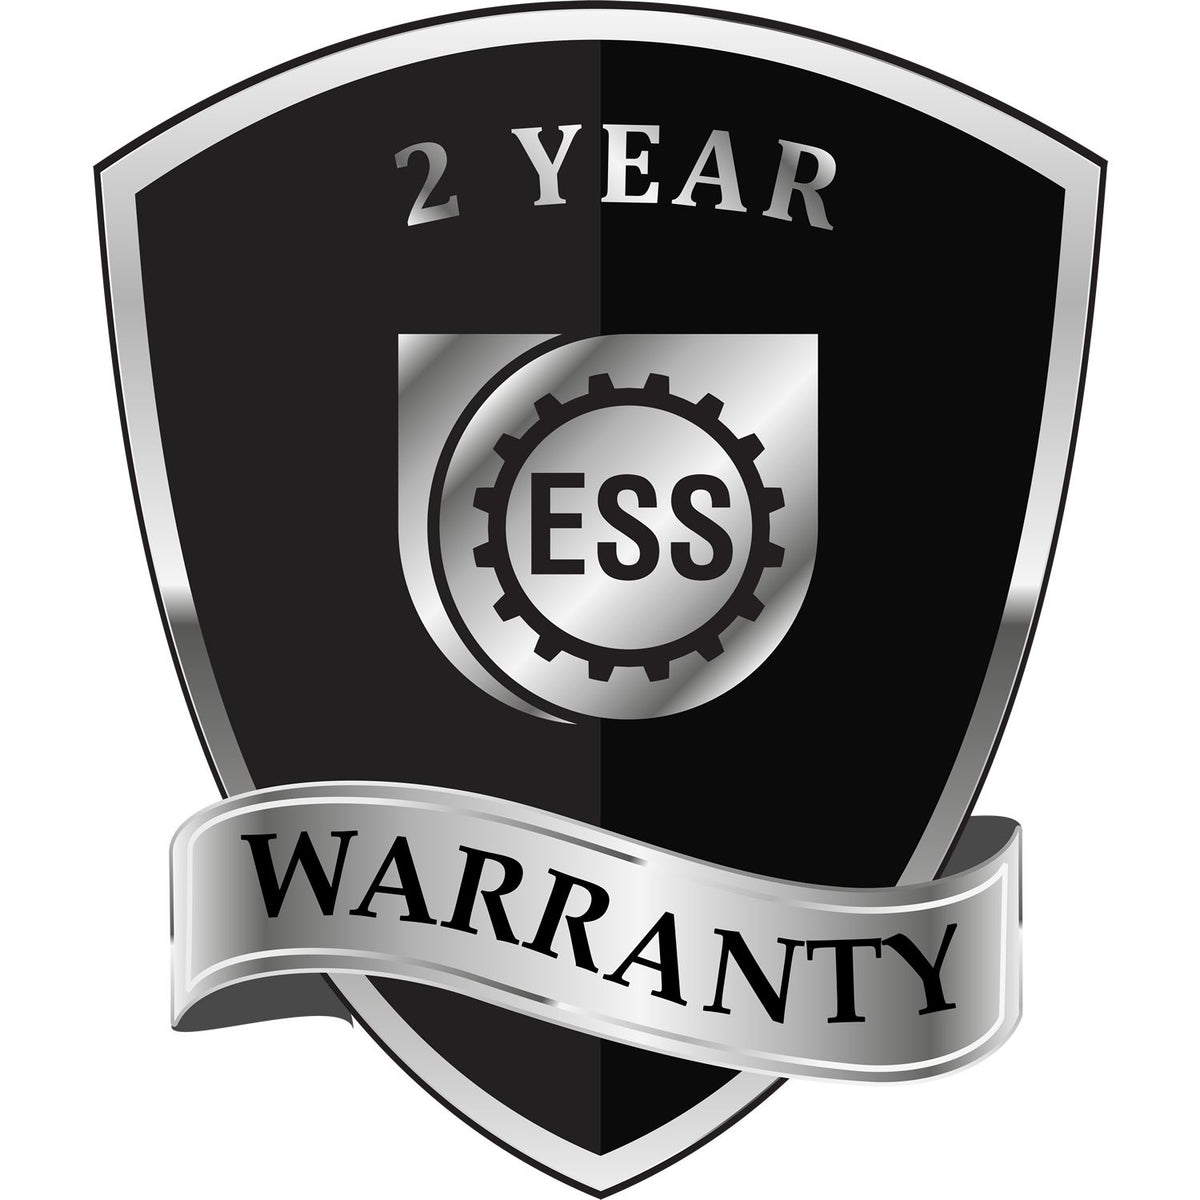 A black and silver badge or emblem showing warranty information for the Gift Idaho Land Surveyor Seal